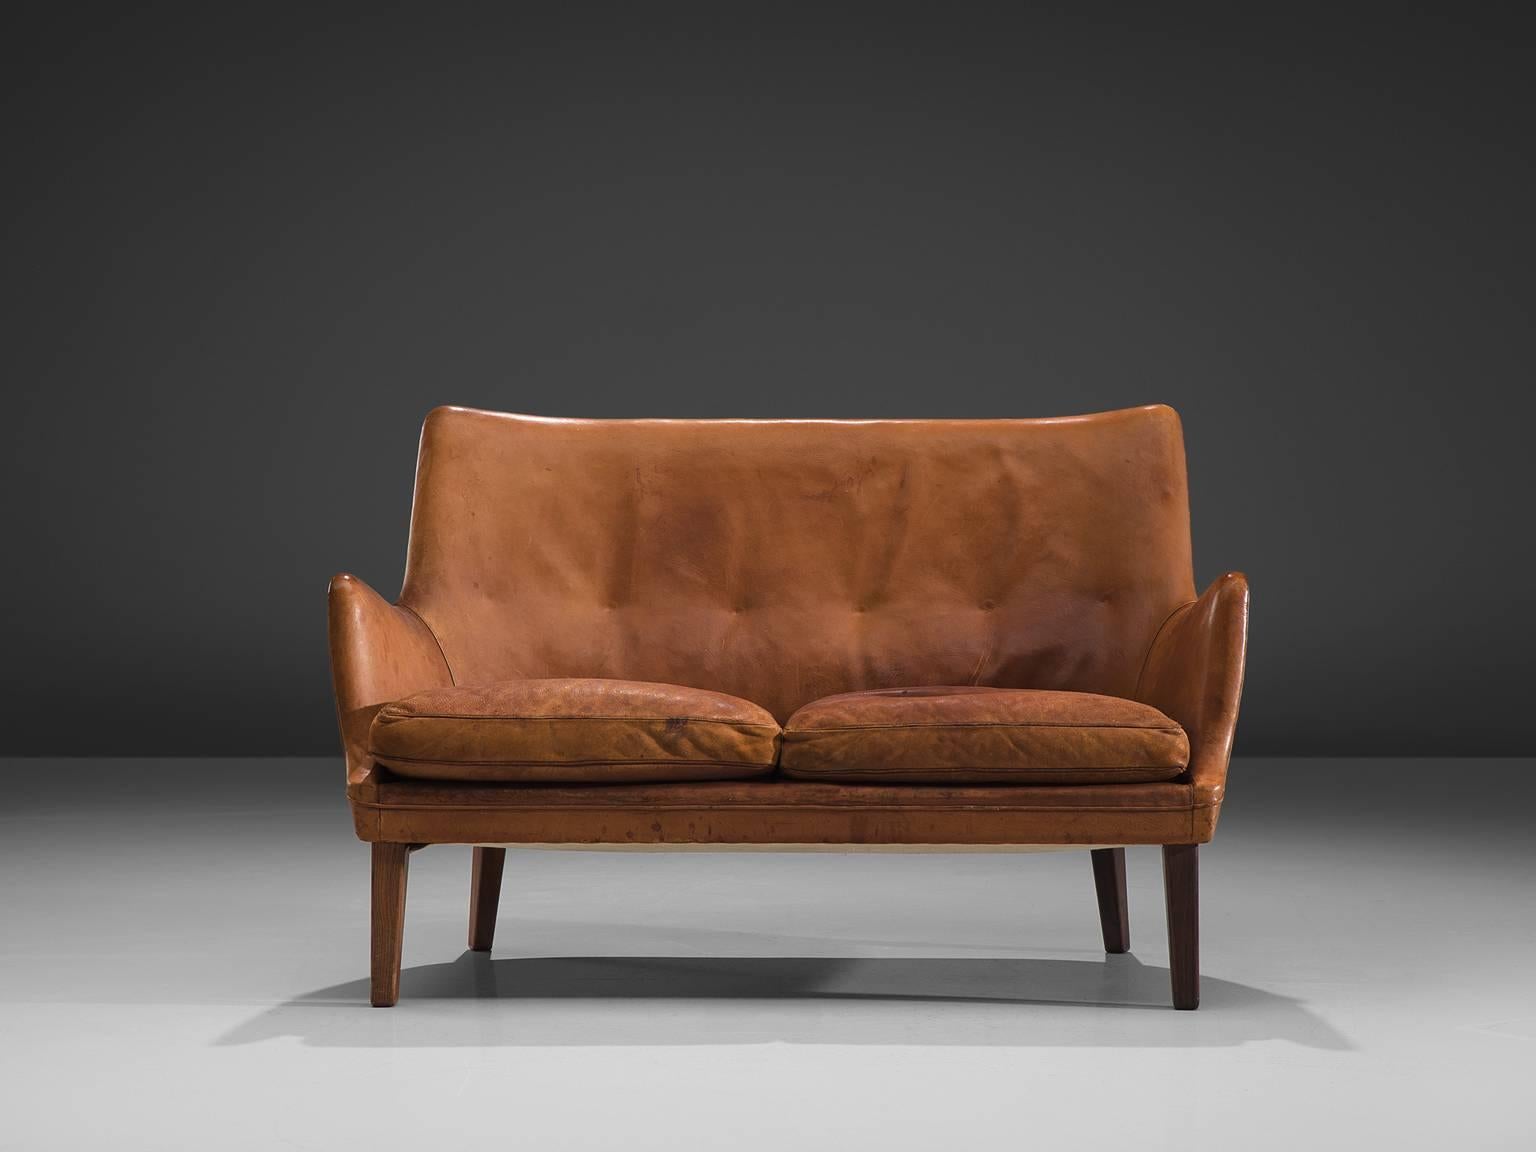 Arne Vodder for Ivan Schlechter, sofa, cognac leather and rosewood, Denmark, 1953.

Elegant two-seat settee in cognac leather and rosewood by Danish designer Arne Vodder and upholstered by master upholster Ivan Slechter. This sofa shows the great